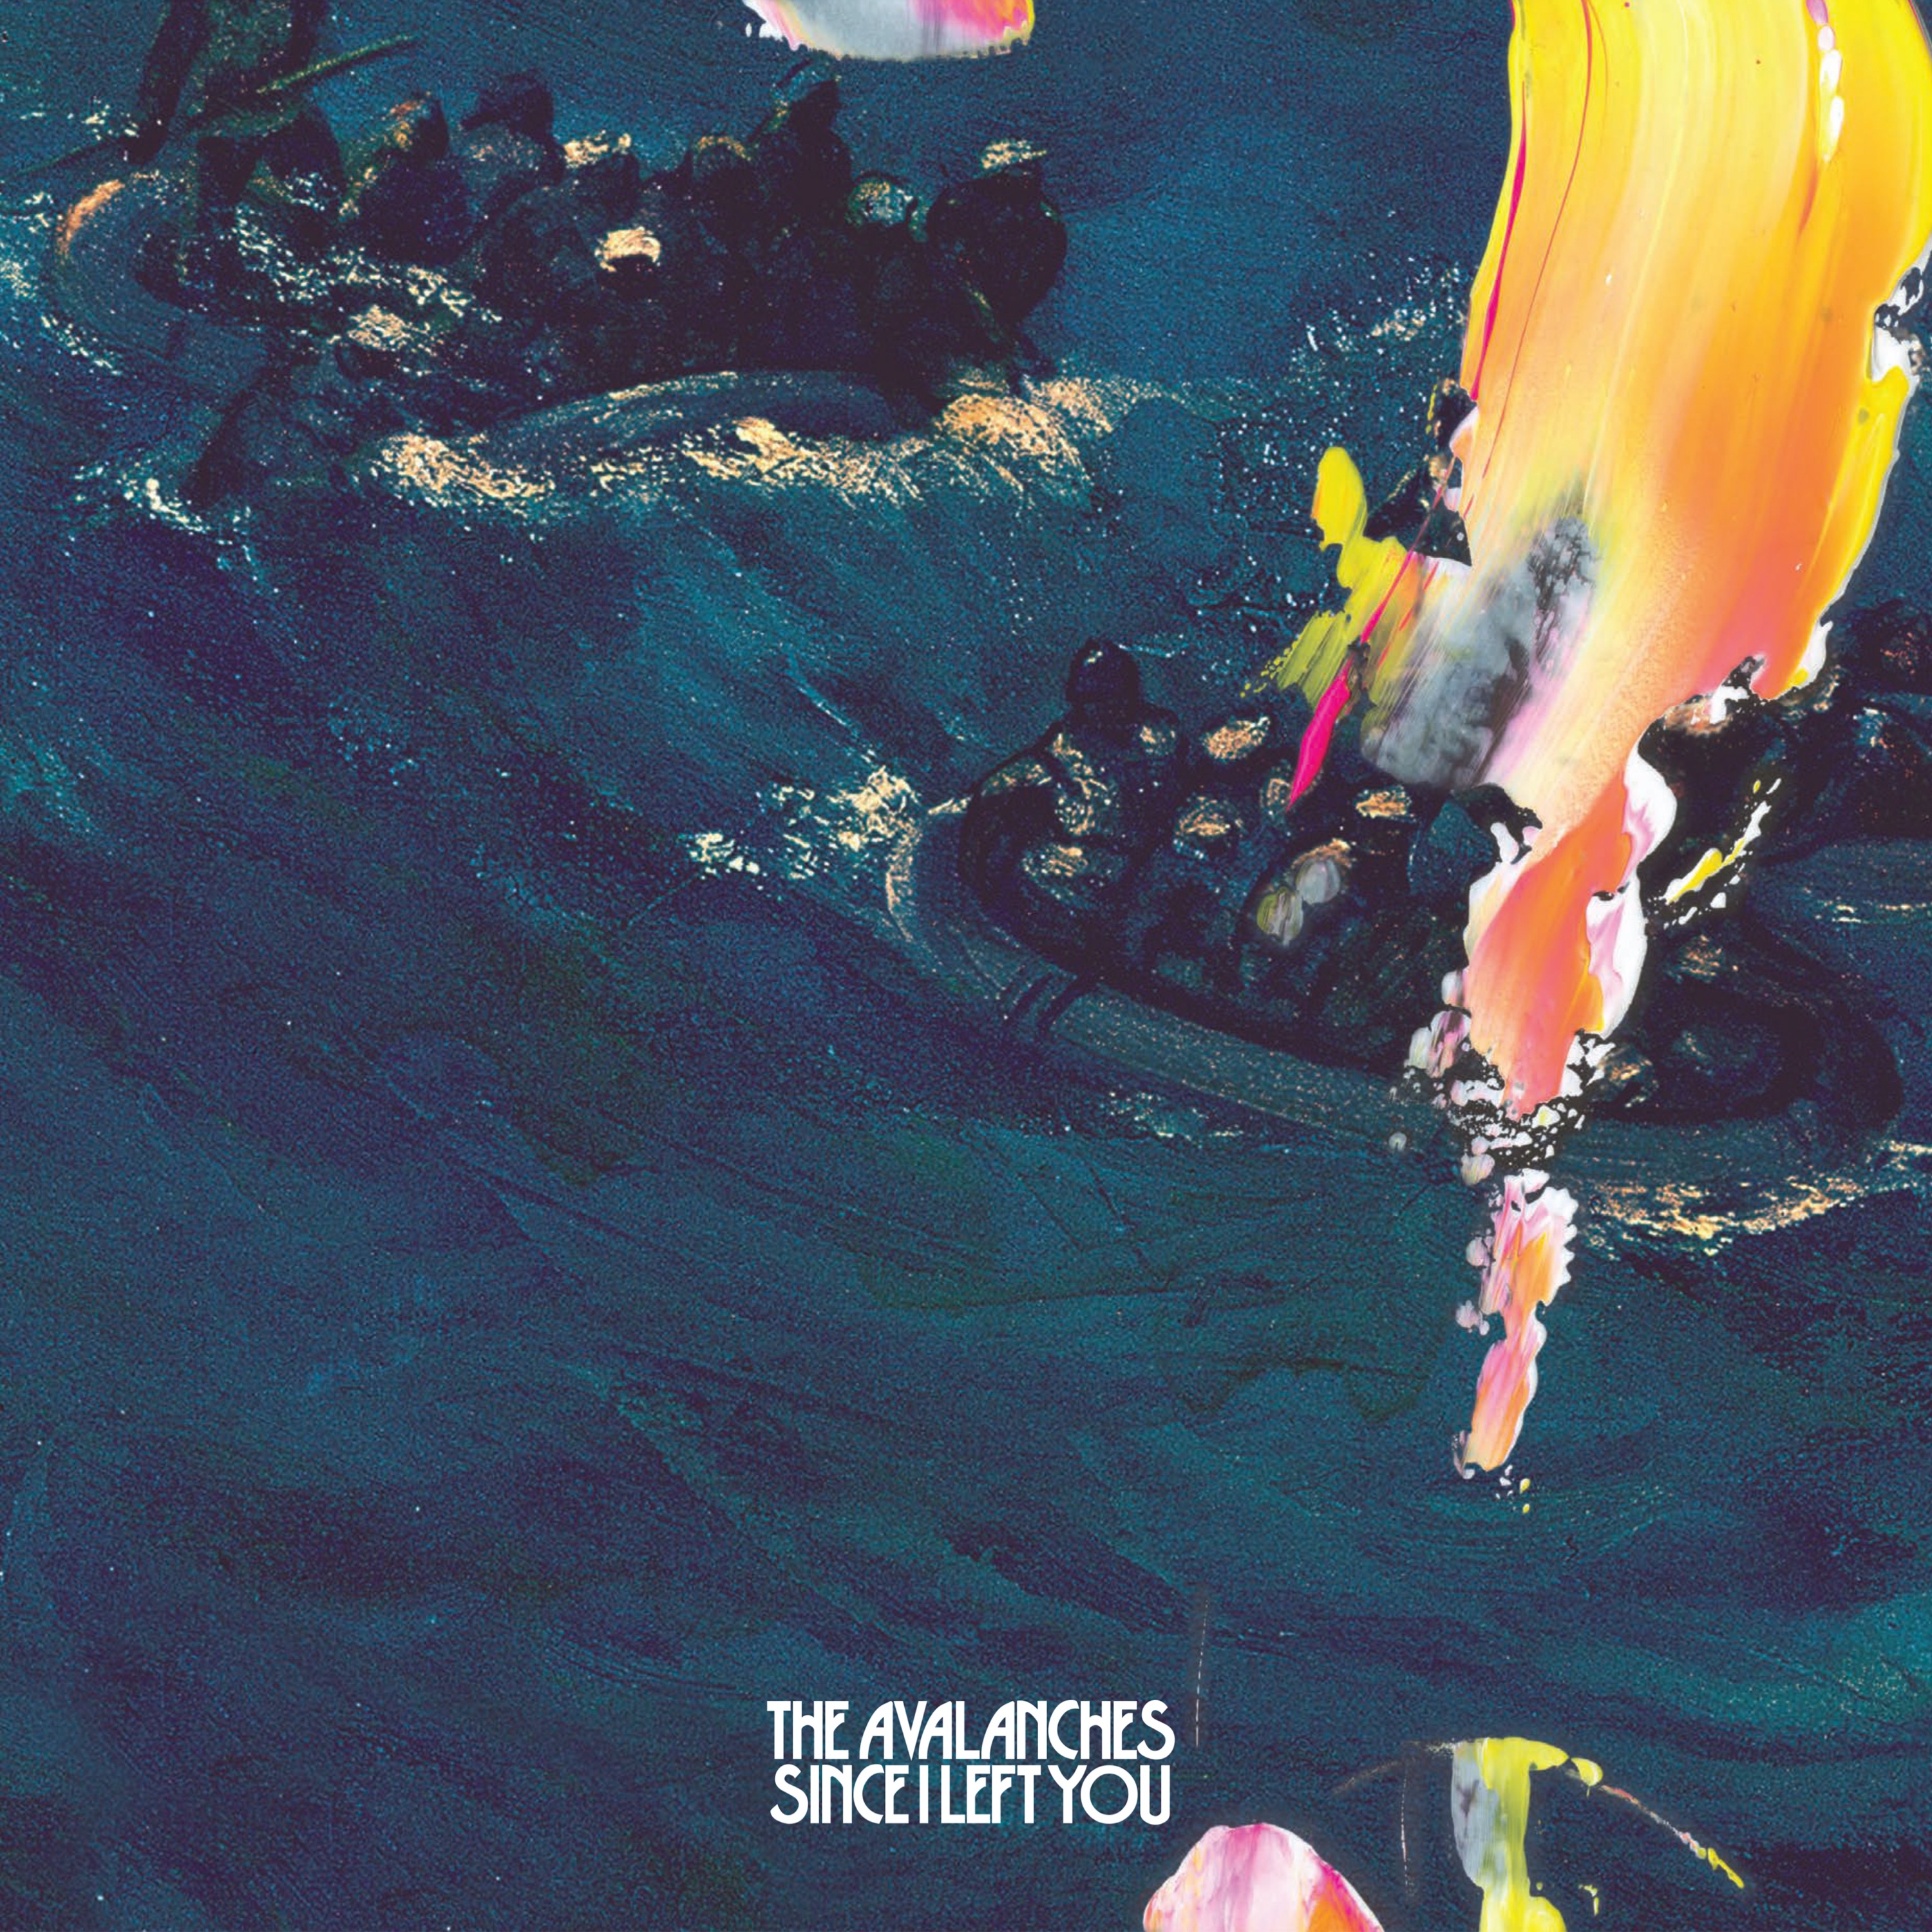 The Avalanches - Since I Left You (Deluxe Edition) - 2xCD